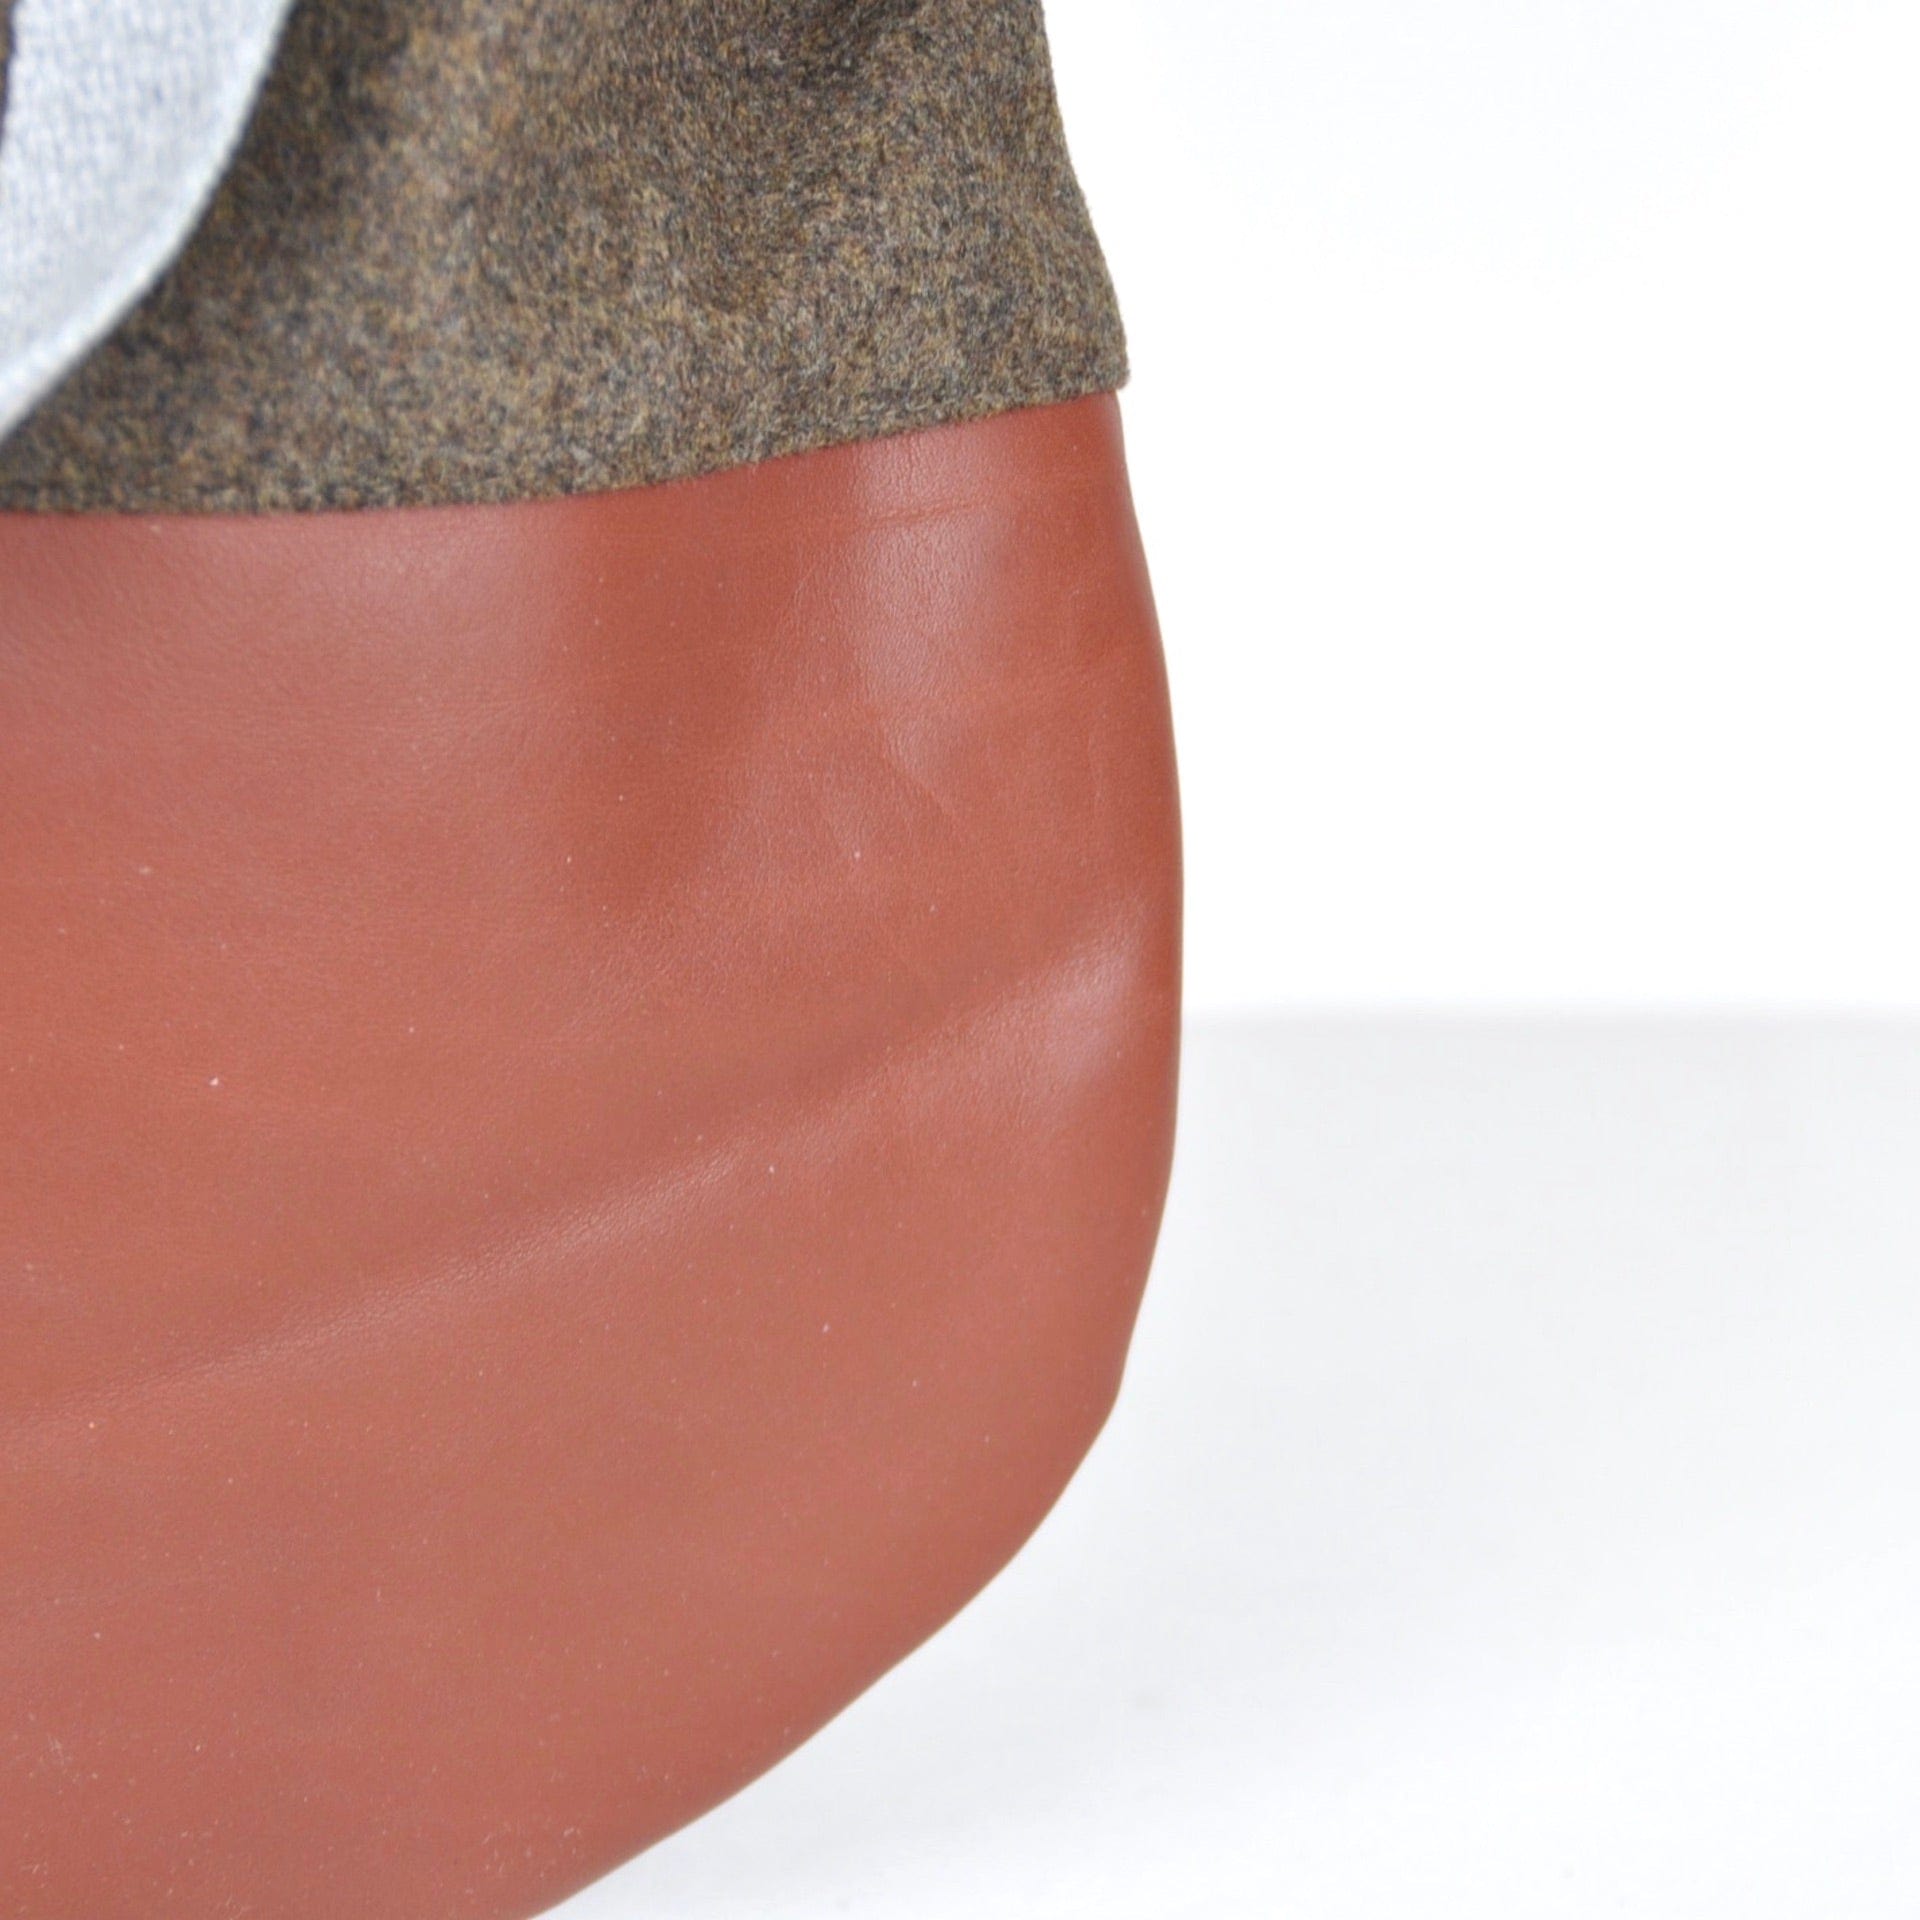 Bits & Totes Bag Wool and Leather Round Bottom Bag - Khaki Wool & Brown Leather